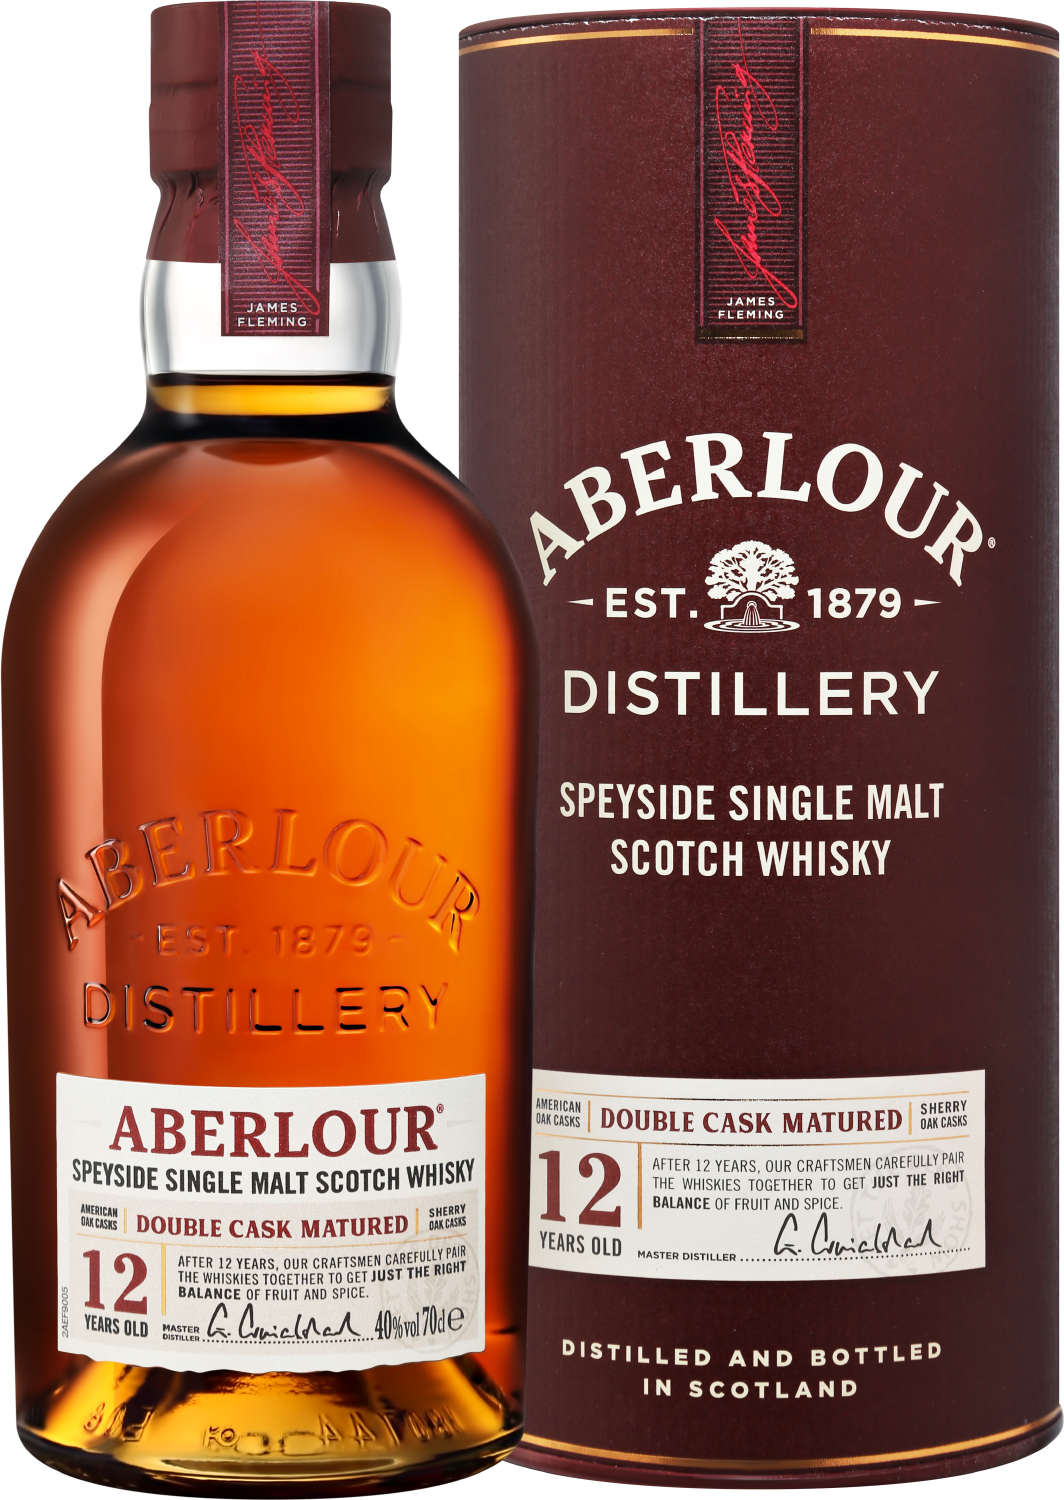 Aberlour Double Cask Matured Speyside Single Malt Scotch Whisky 12 y.o. (gift box) the glenrothes bourbon cask reserve speyside single malt scotch whisky gift box